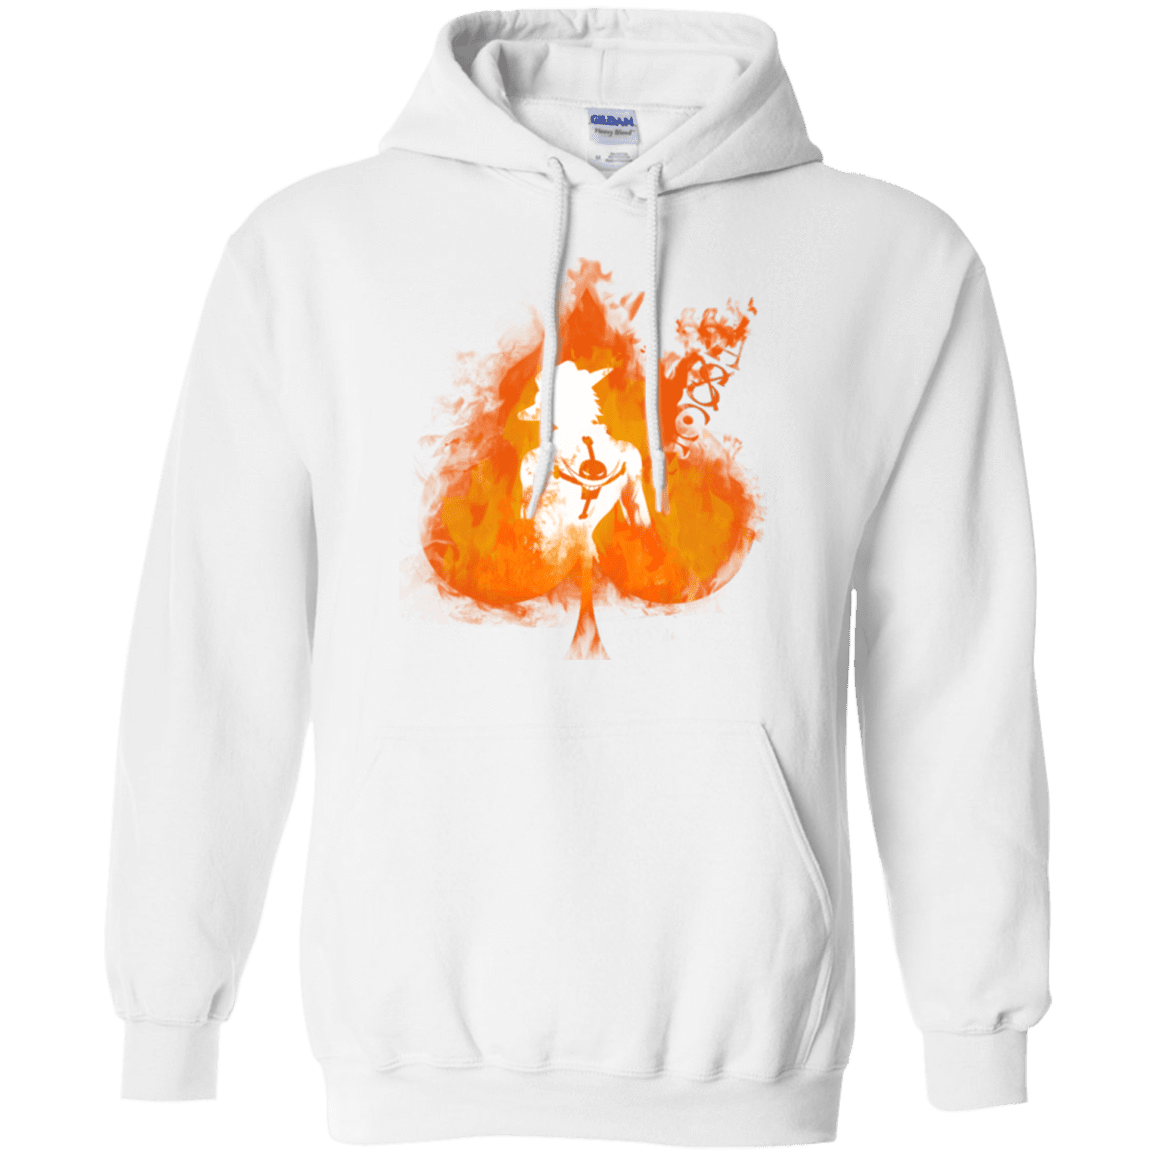 Sweatshirts White / Small Ace one piece Pullover Hoodie